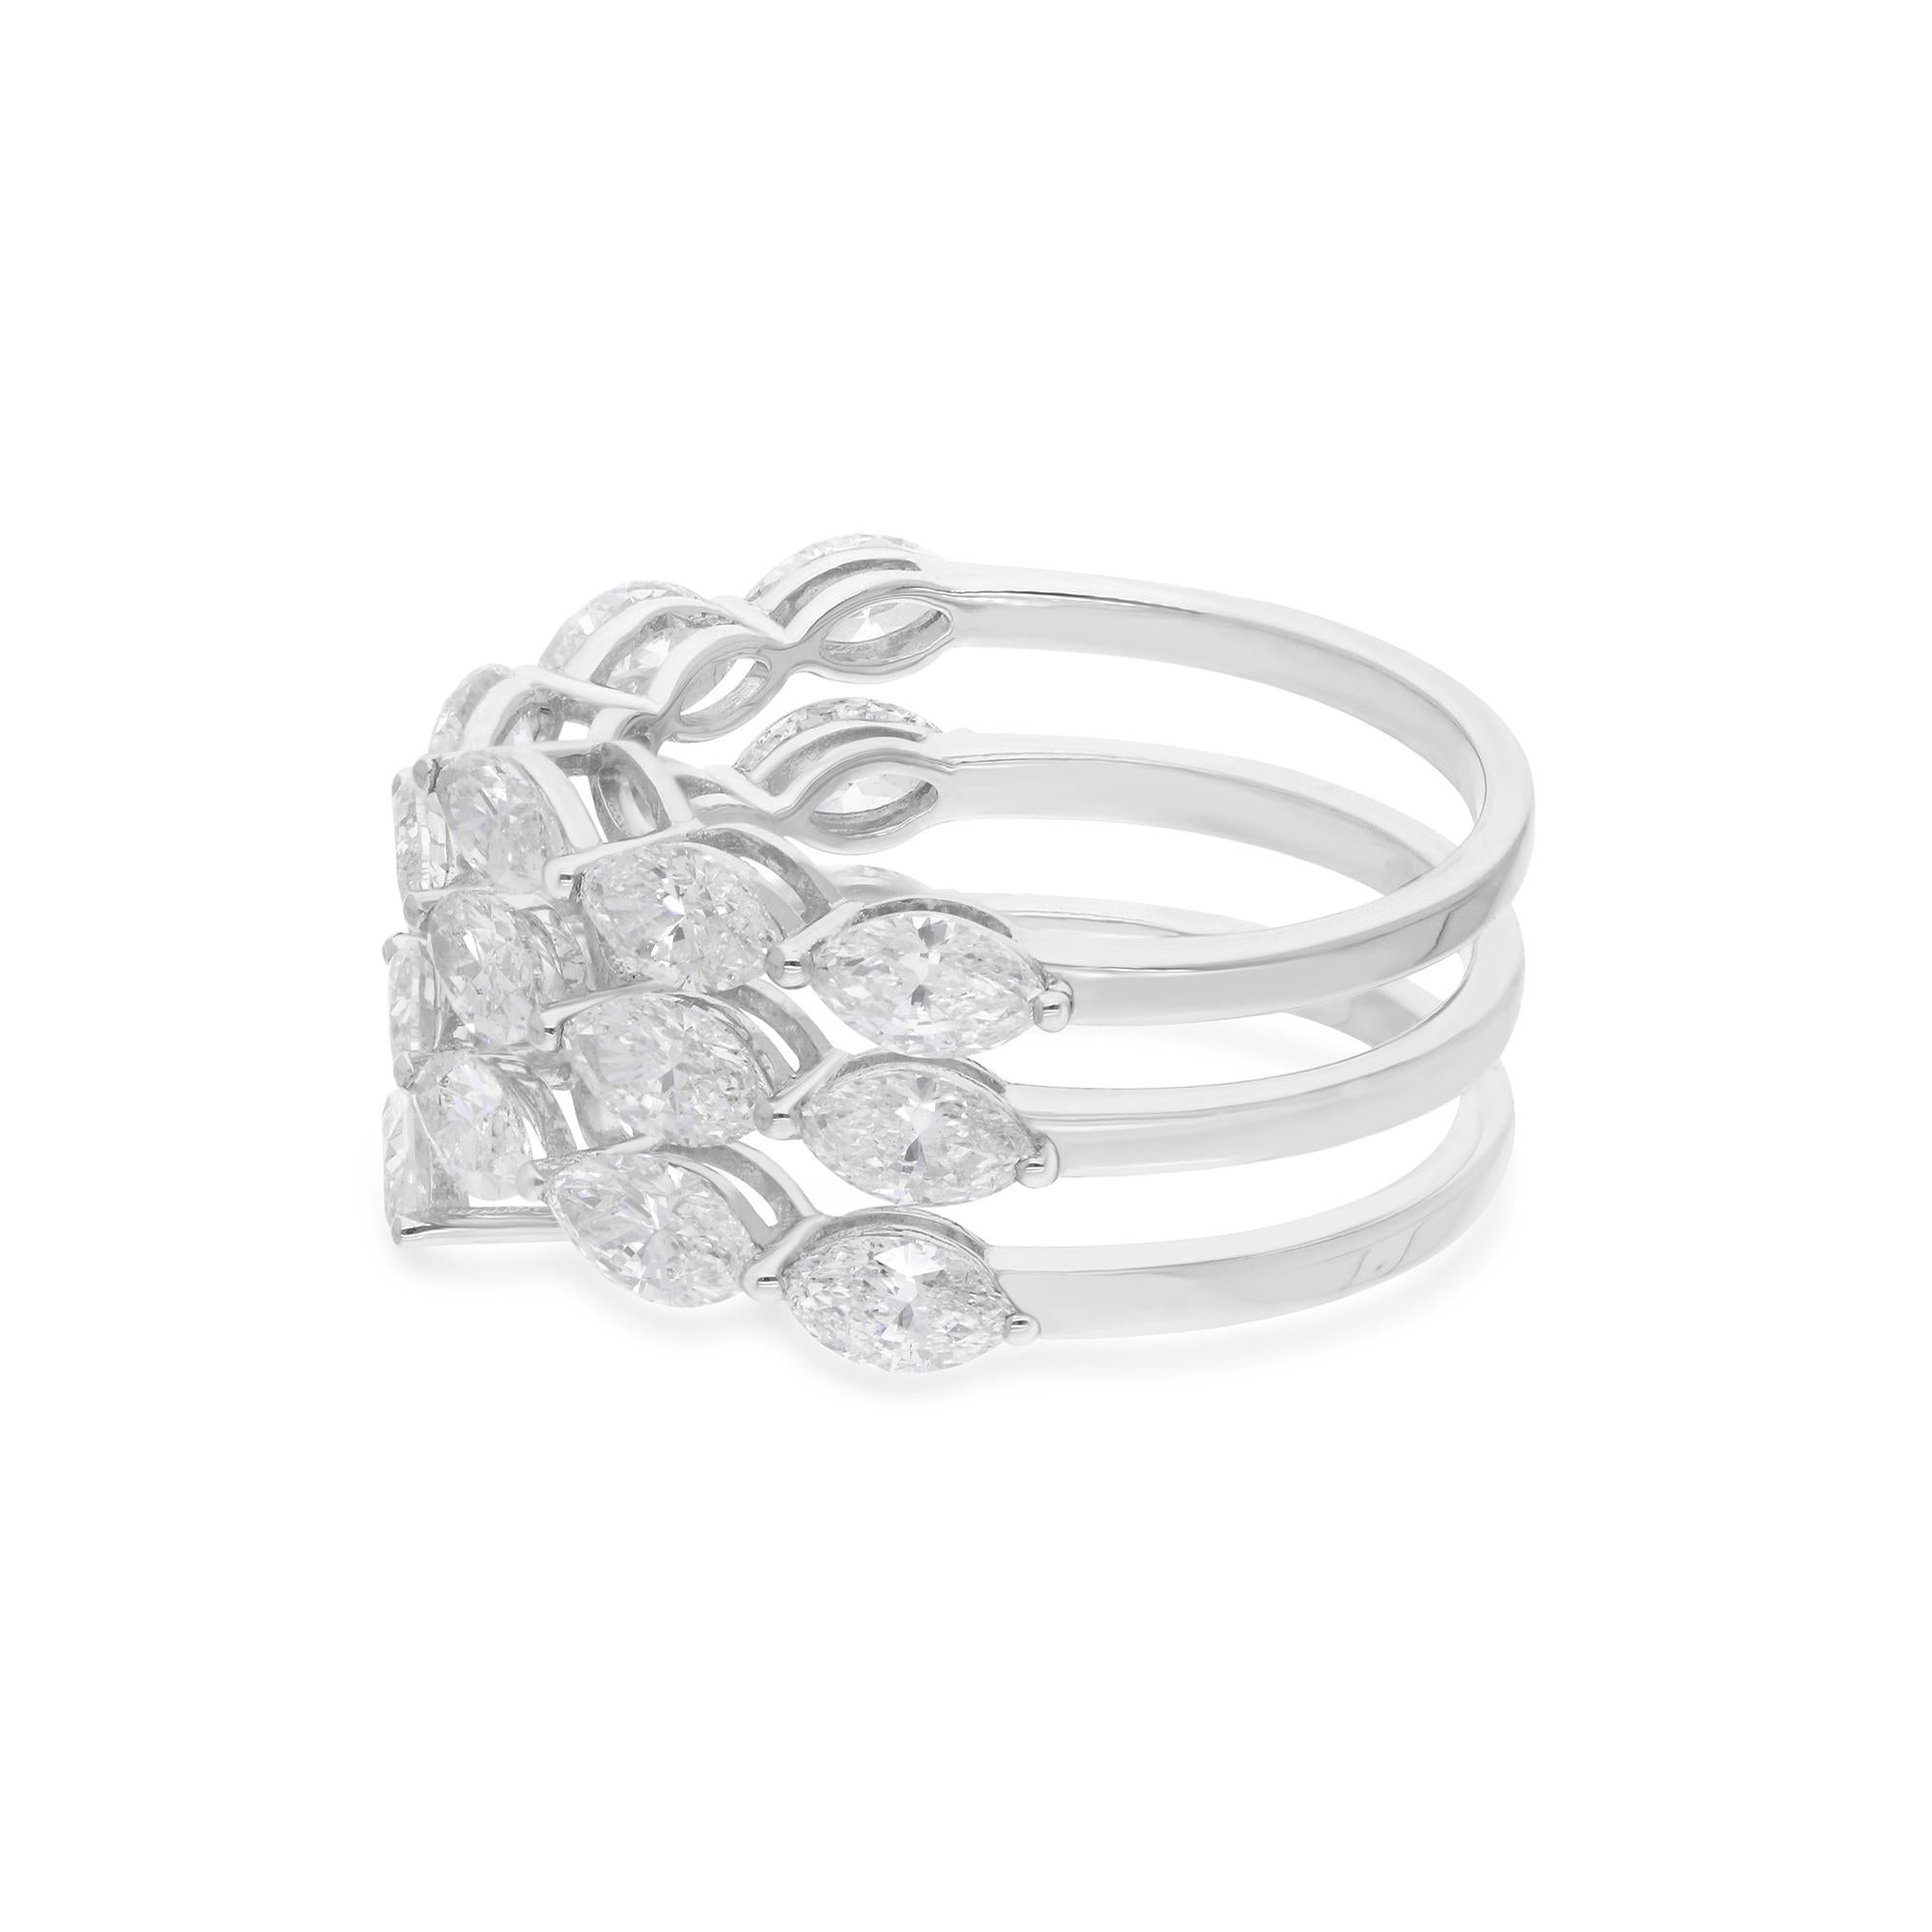 Crafted with meticulous attention to detail, the diamond is set in a graceful spiral design that elegantly wraps around your finger, creating a sense of movement and fluidity. The lustrous 18 Karat White Gold setting enhances the beauty of the